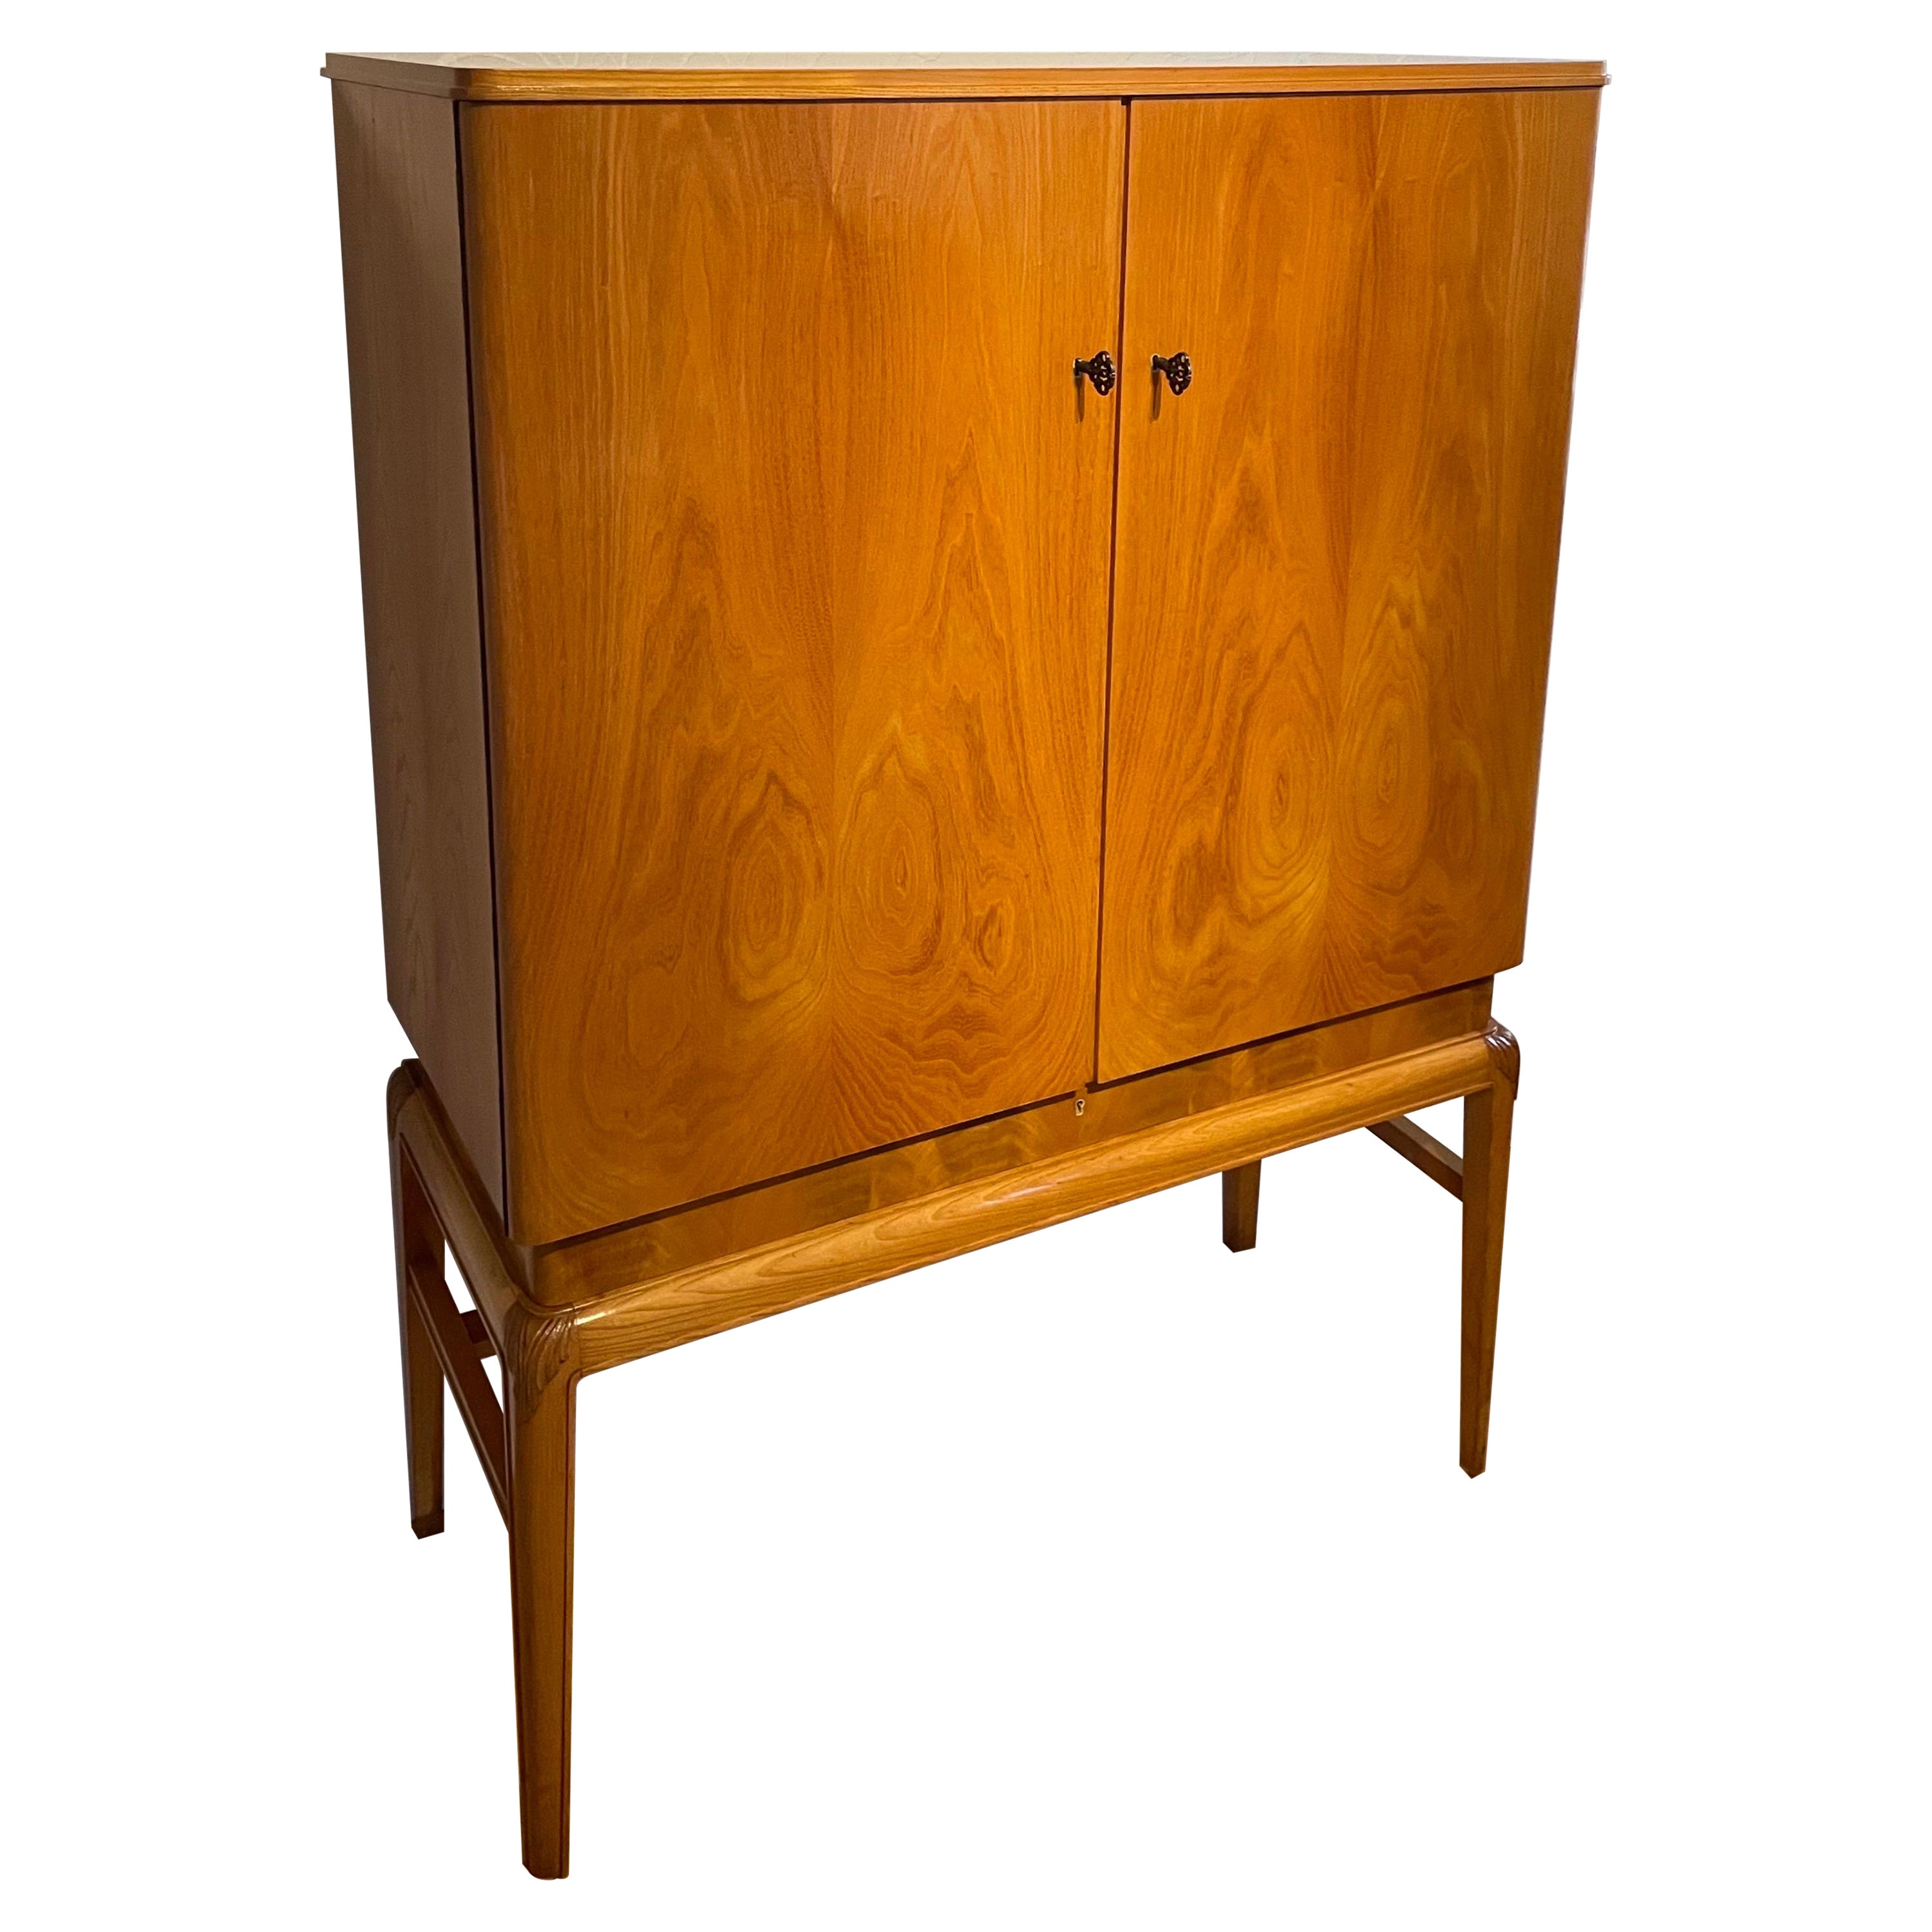 This is the 1930s Swedish Grace cabinet made from elm in nearly excellent condition.

It comes with tall elegant leg structure with soft rounded “hips” decorated with hand carved ornaments.
The tapered mid section gives the cabinet a “waistline”